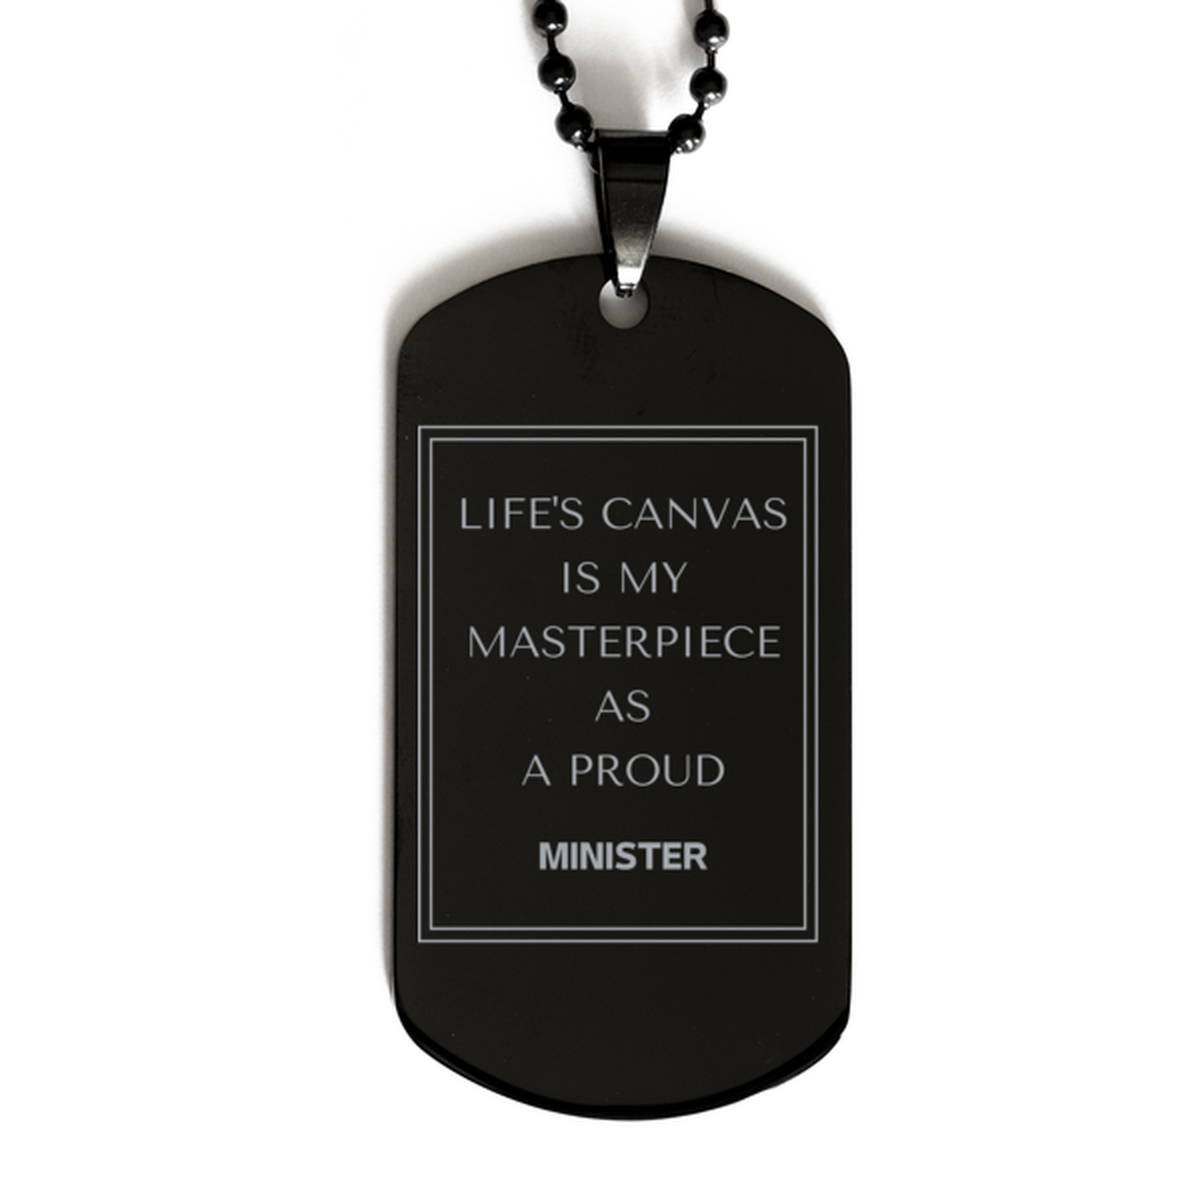 Proud Minister Gifts, Life's canvas is my masterpiece, Epic Birthday Christmas Unique Black Dog Tag For Minister, Coworkers, Men, Women, Friends